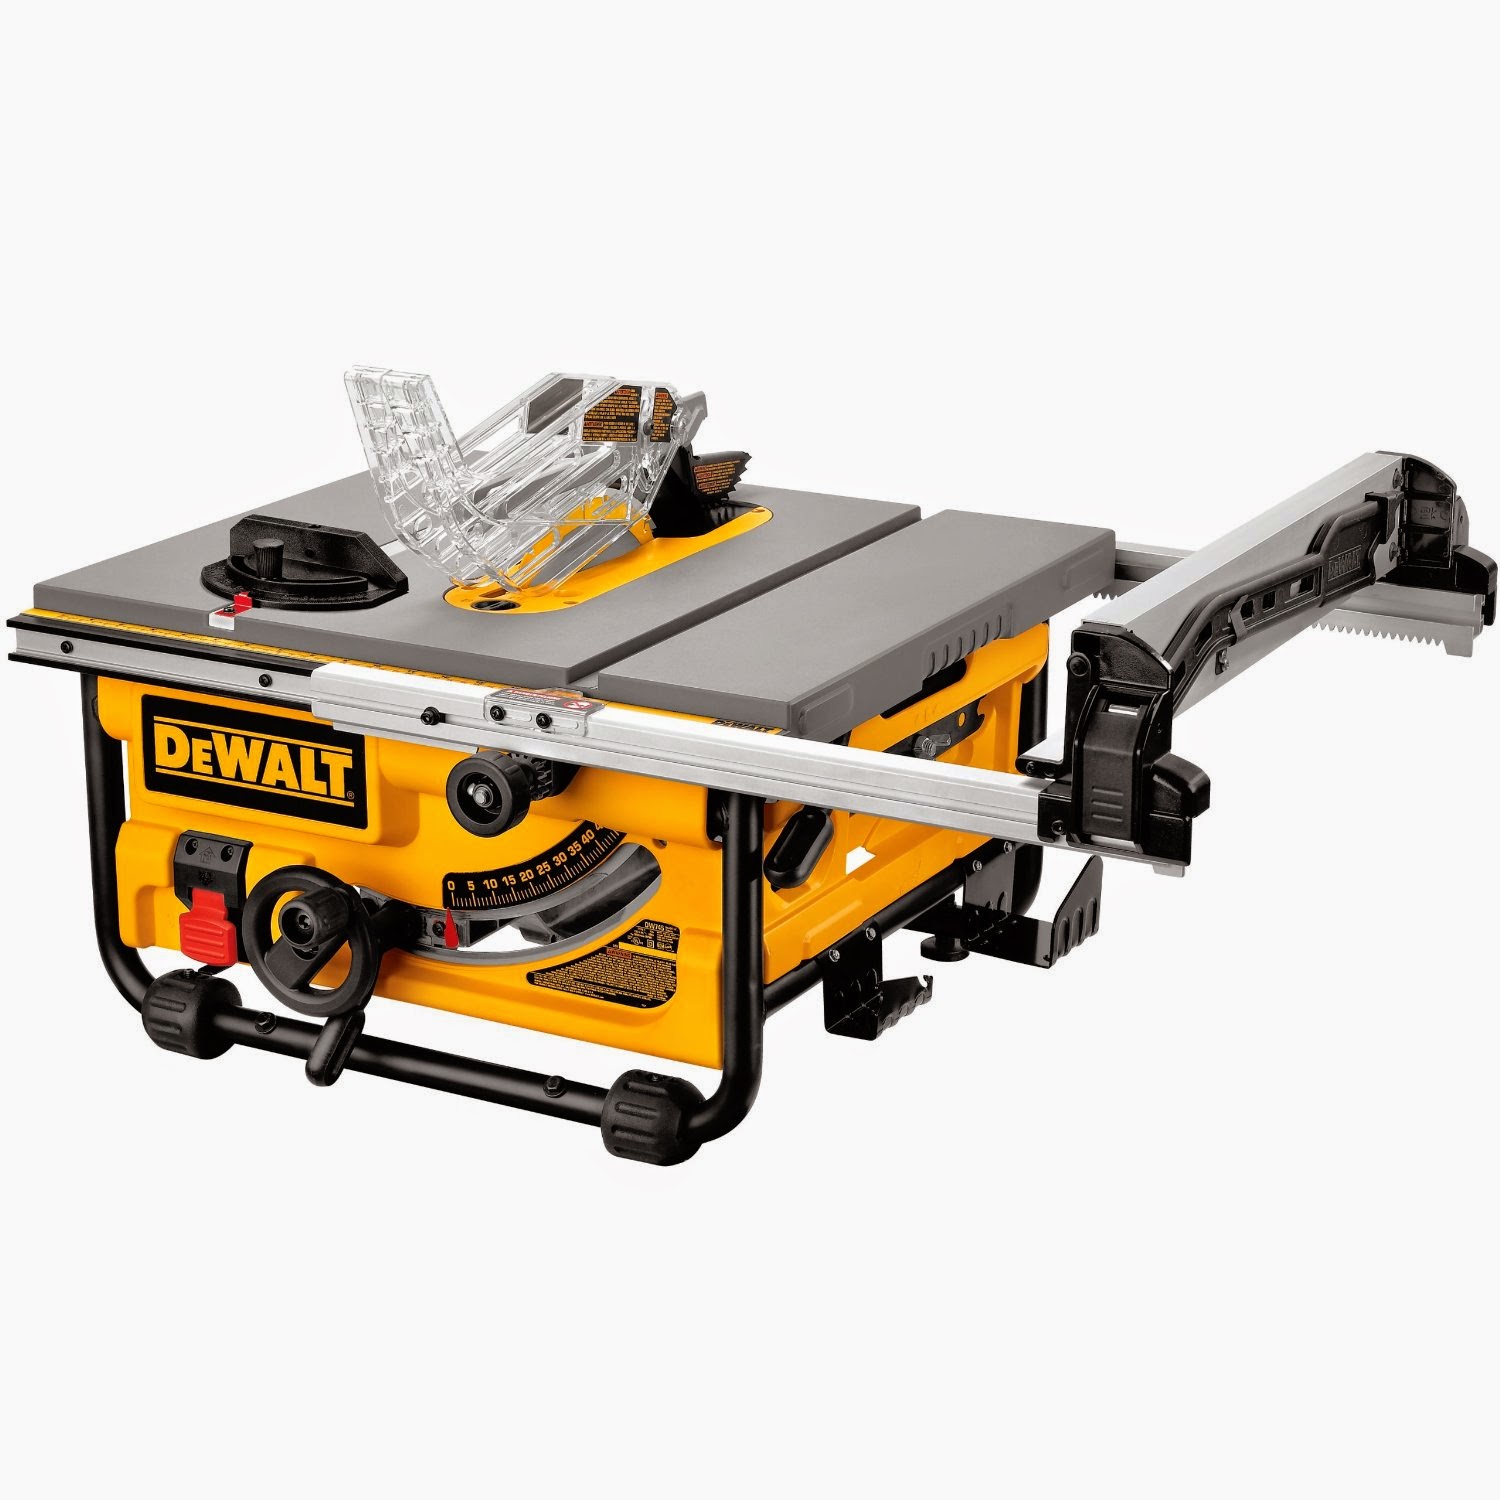 DEWALT DW745 10-Inch Compact Job-Site Table Saw with 20-Inch Max Rip Capacity, picture, image, review features and specifications